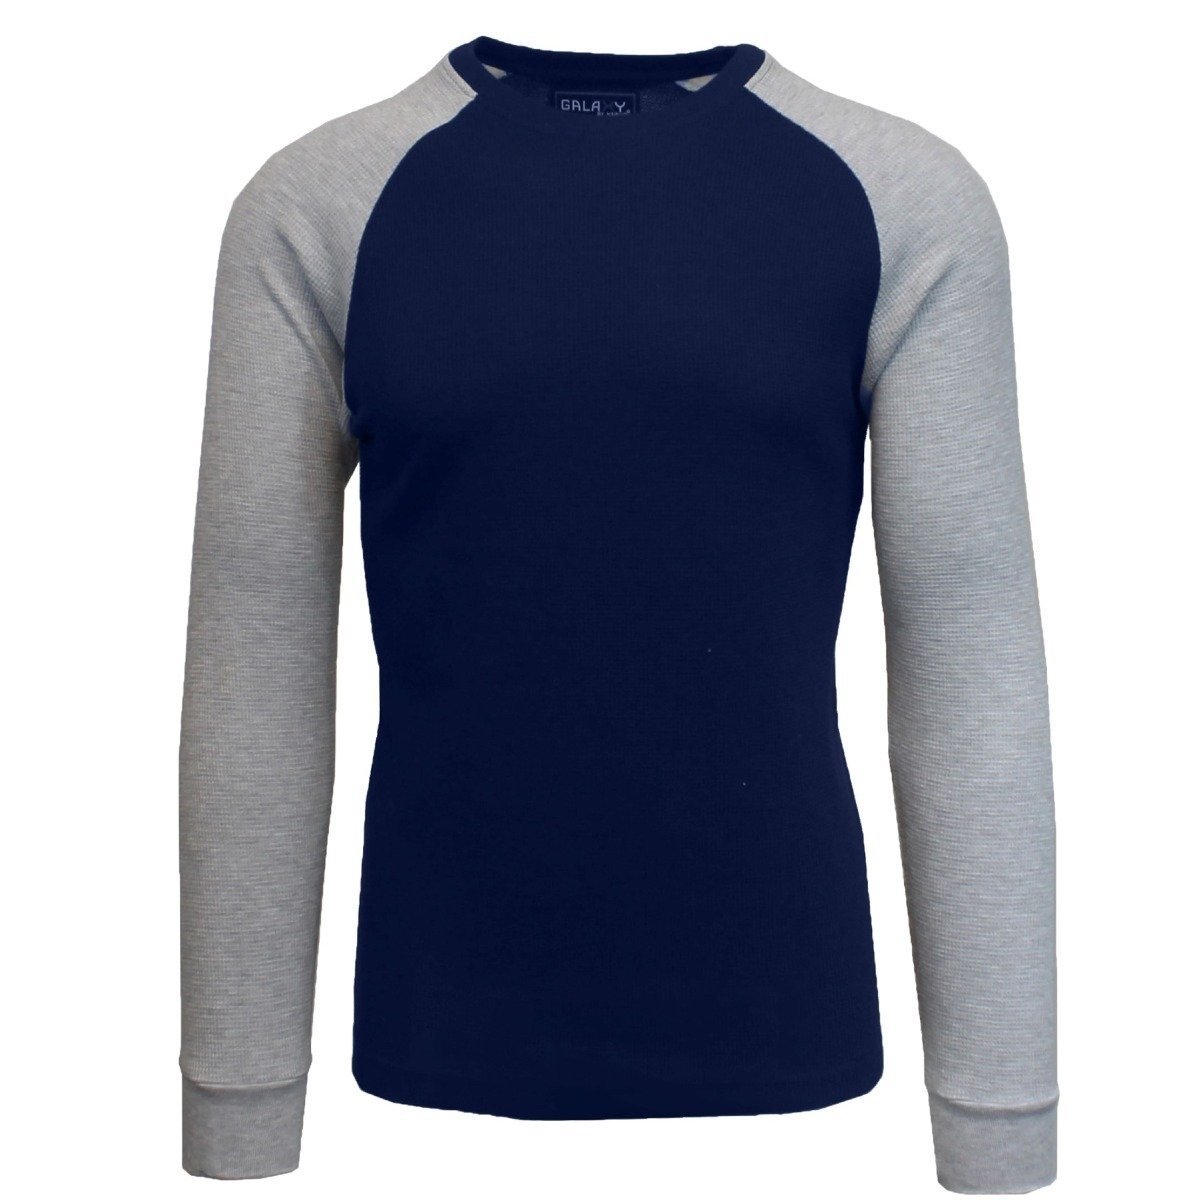 Galaxy by Harvic Men&#39;s Raglan Thermal Shirt - Assorted Sizes / Navy Blue/Heather Gray / Small